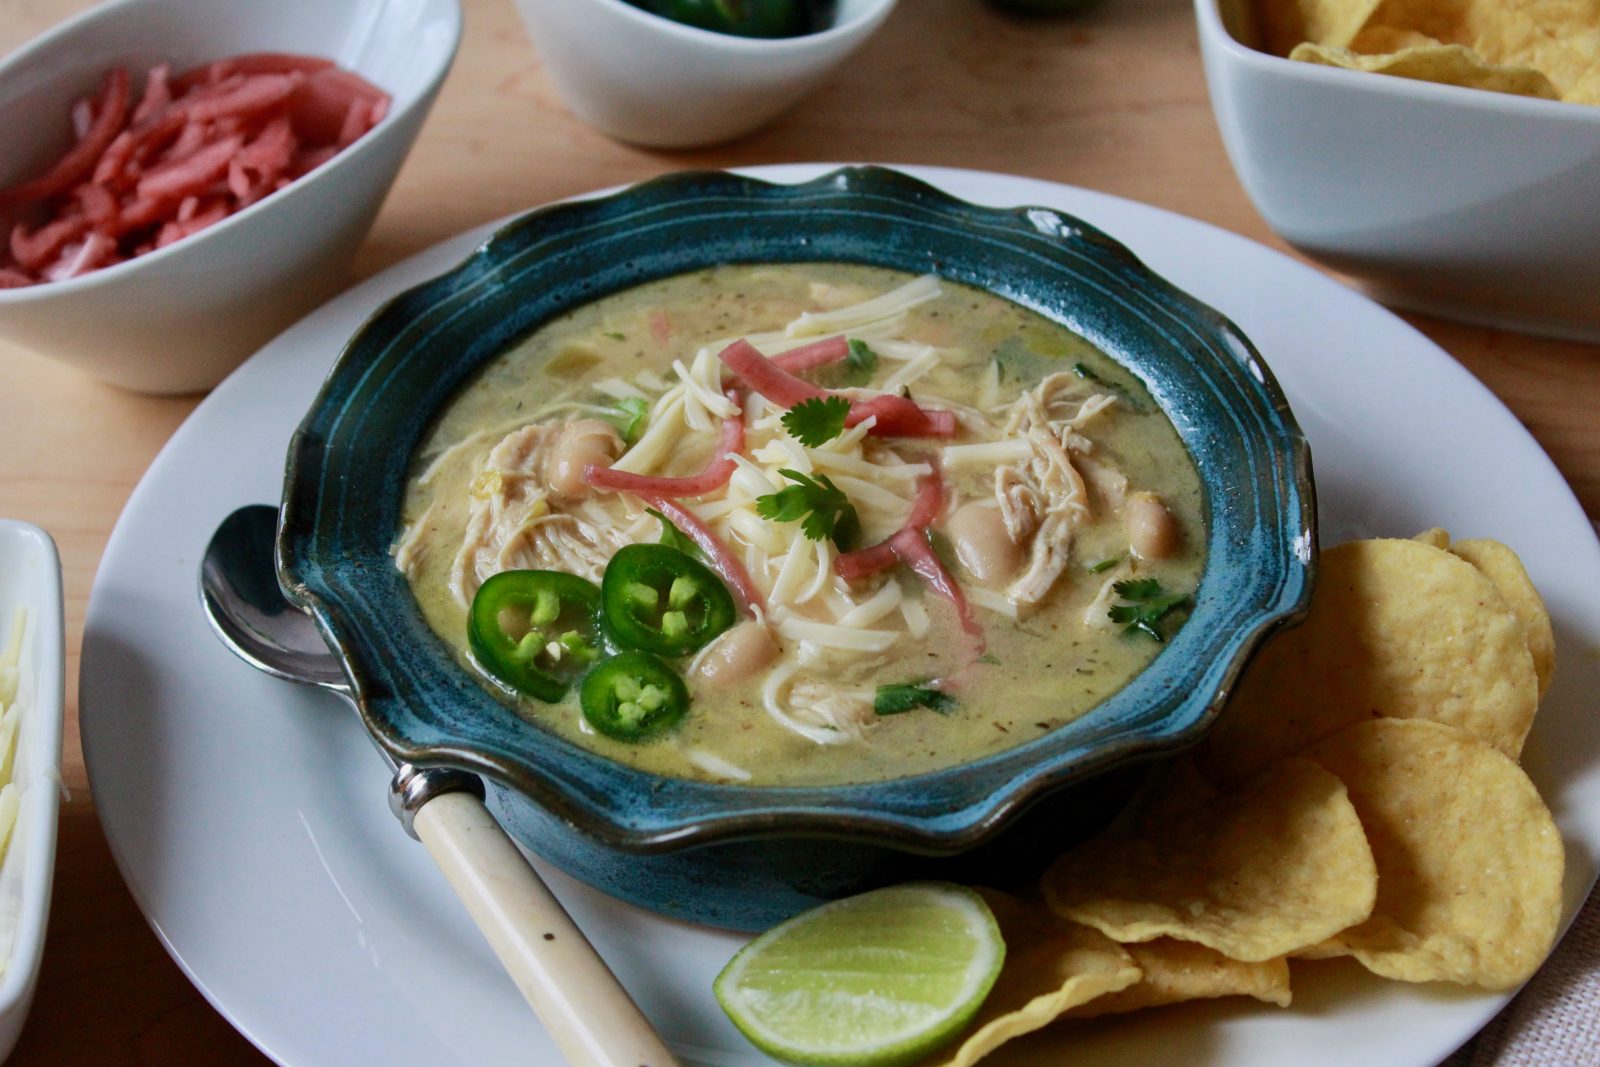 Horizontal photo of Our Favorite White Chicken Chili updated. Blue pottery bowl with ruffled edge filled with white chicken chili and garnished with cilantro, sliced fresh jalapeños and cilantro. The bowl is surrounded by limes, jalapeños, picked red onions, tortilla chips and it placed on a white plate with a spoon and a tan colored napkin.